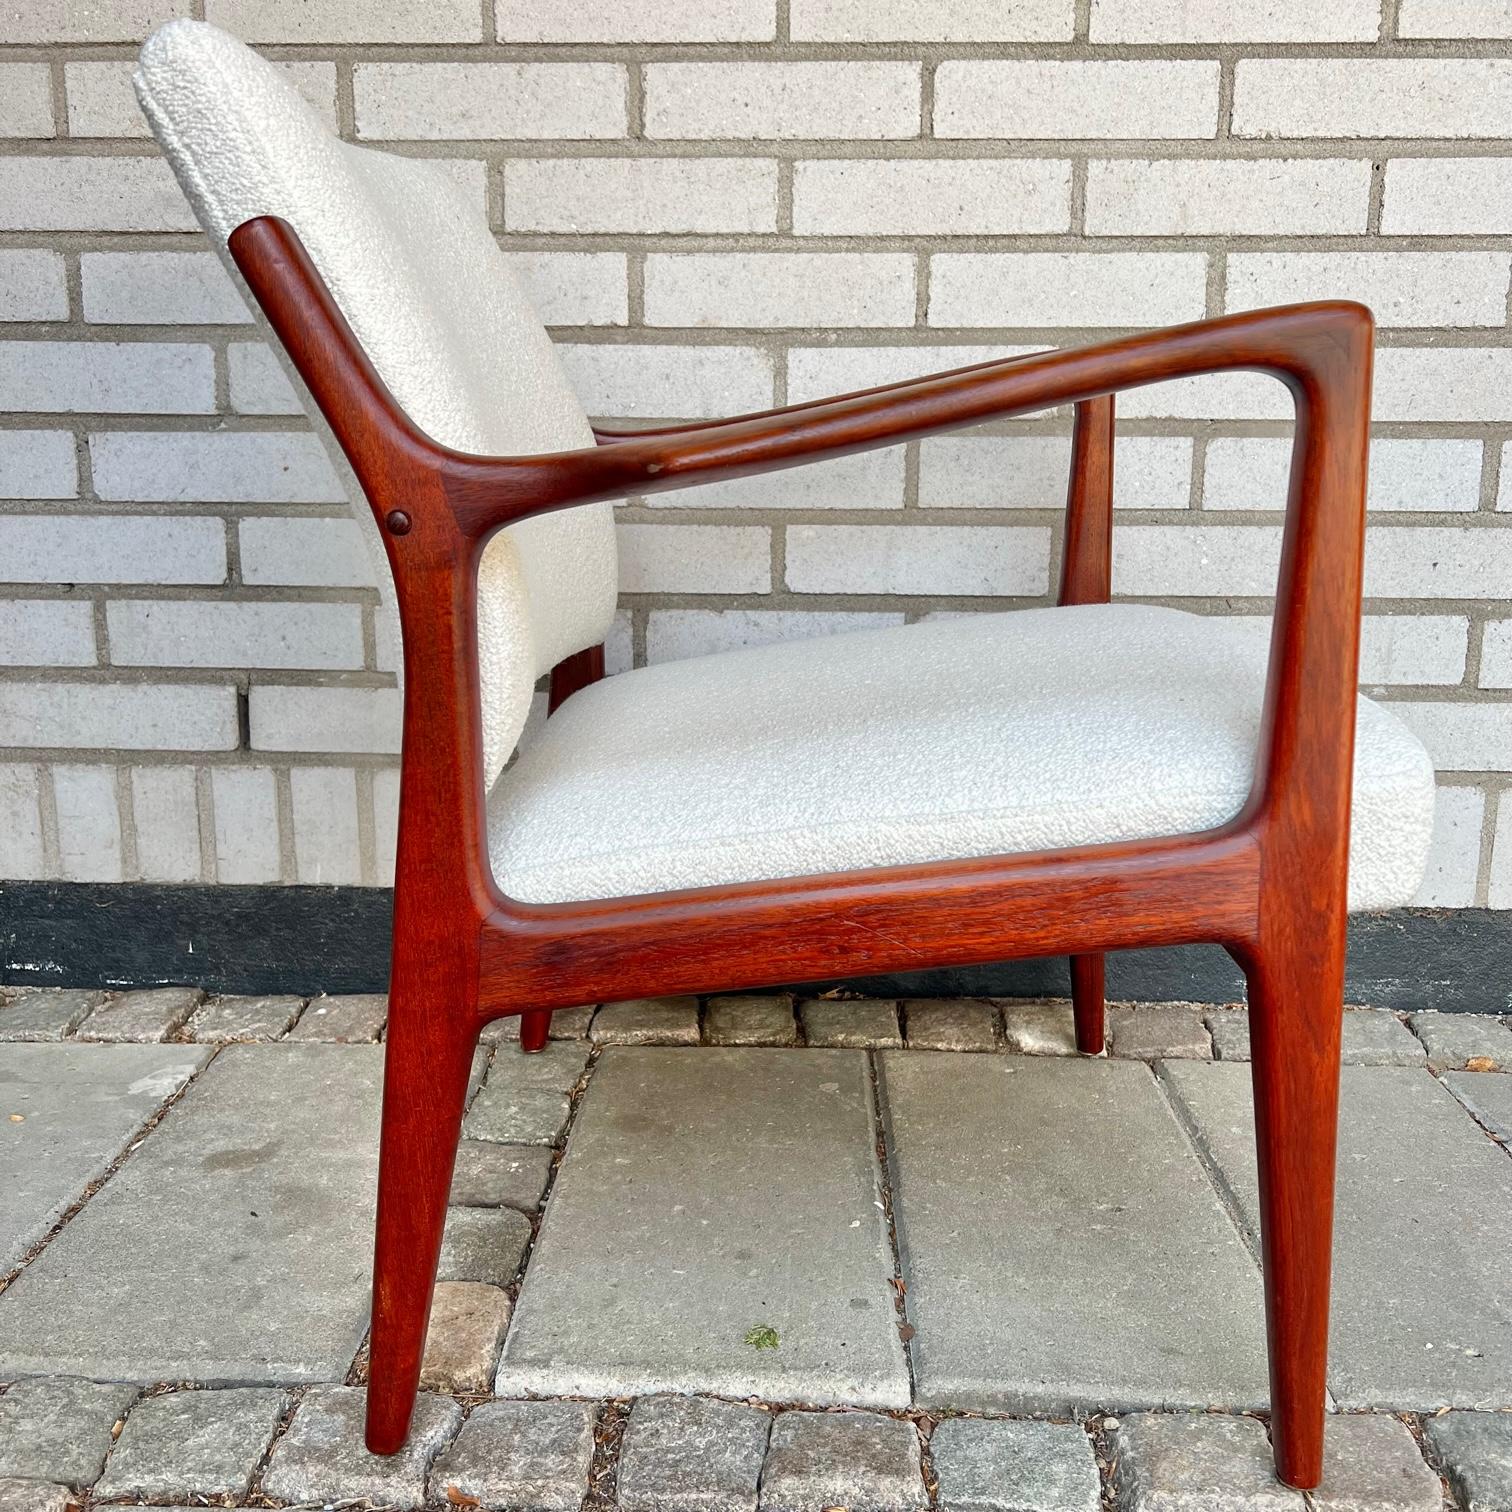 Rare chair designed by Karl-Erik Ekselius, produced by JOC in Vetlanda, Sweden, 1960s.

Solid teak frame and newly upholstered cushions in bouclé wool fabric